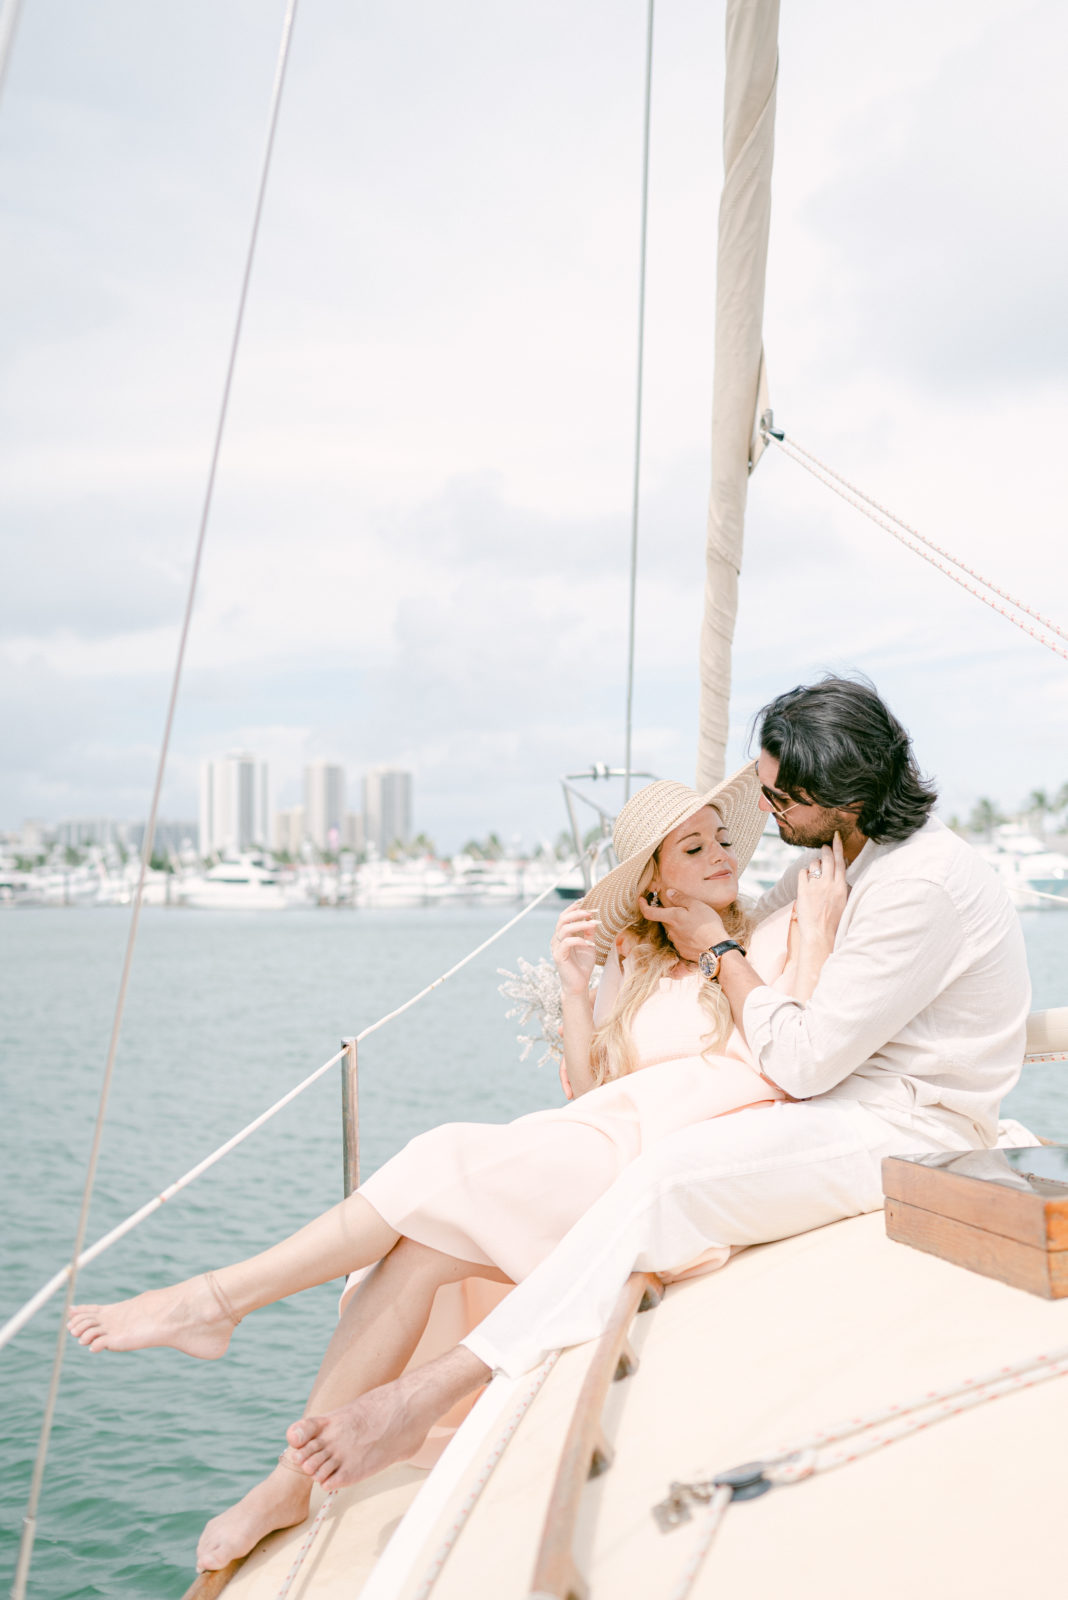 Newly engaged couple on a sailboat in South Florida